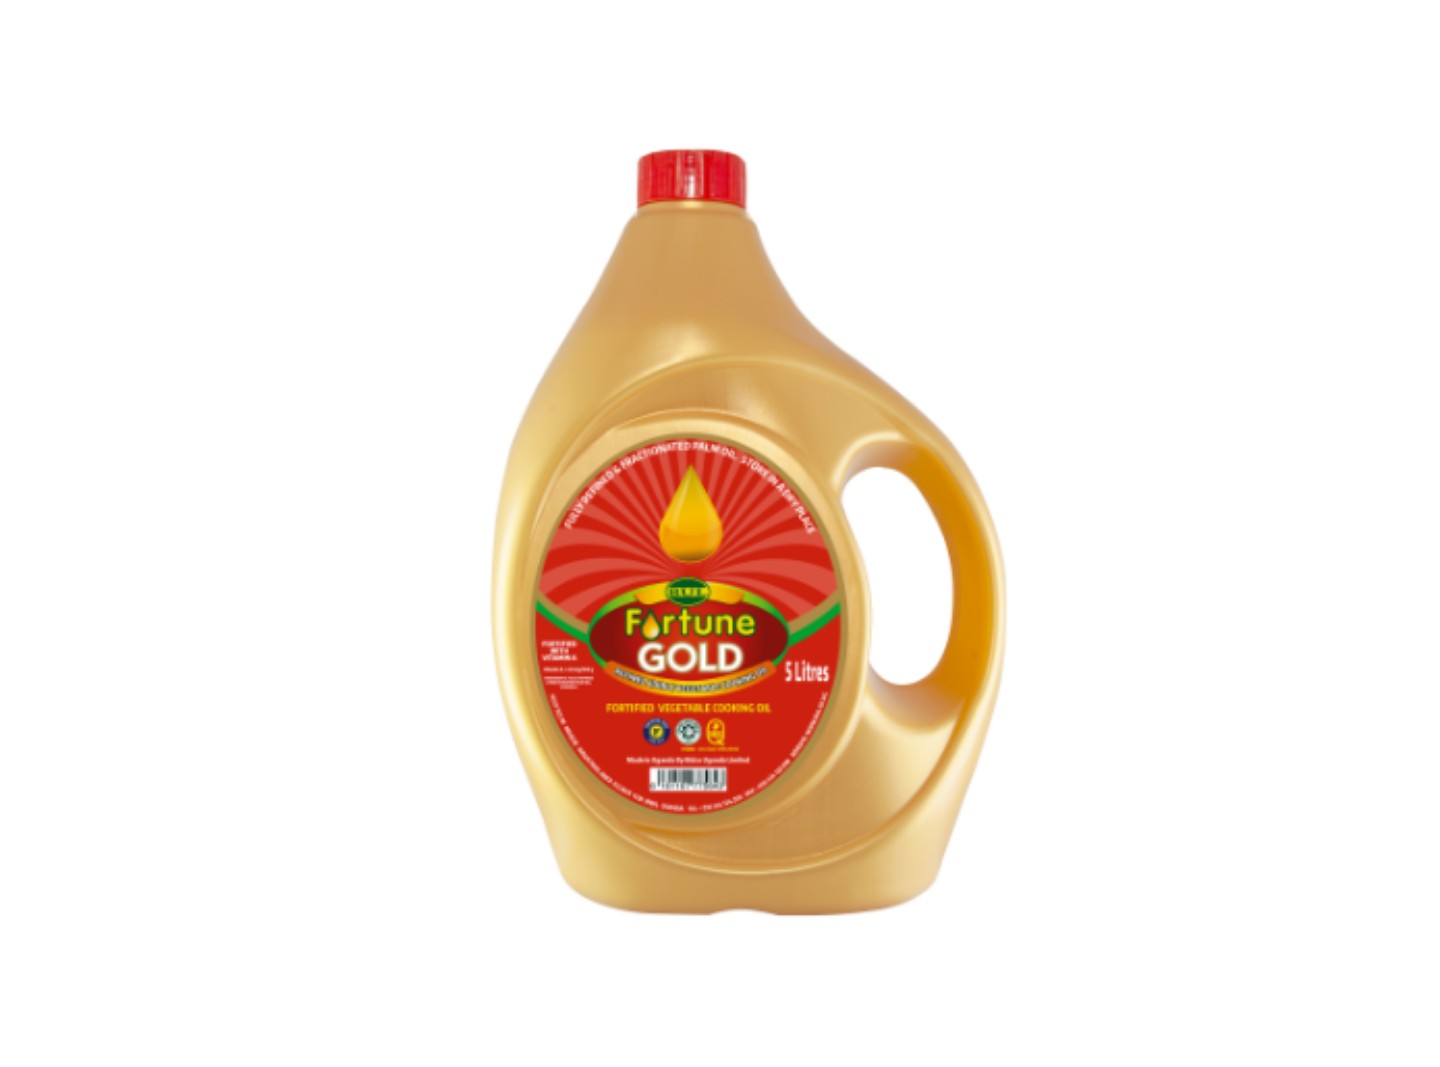 Fortune Gold Cooking Oil 5 Liter